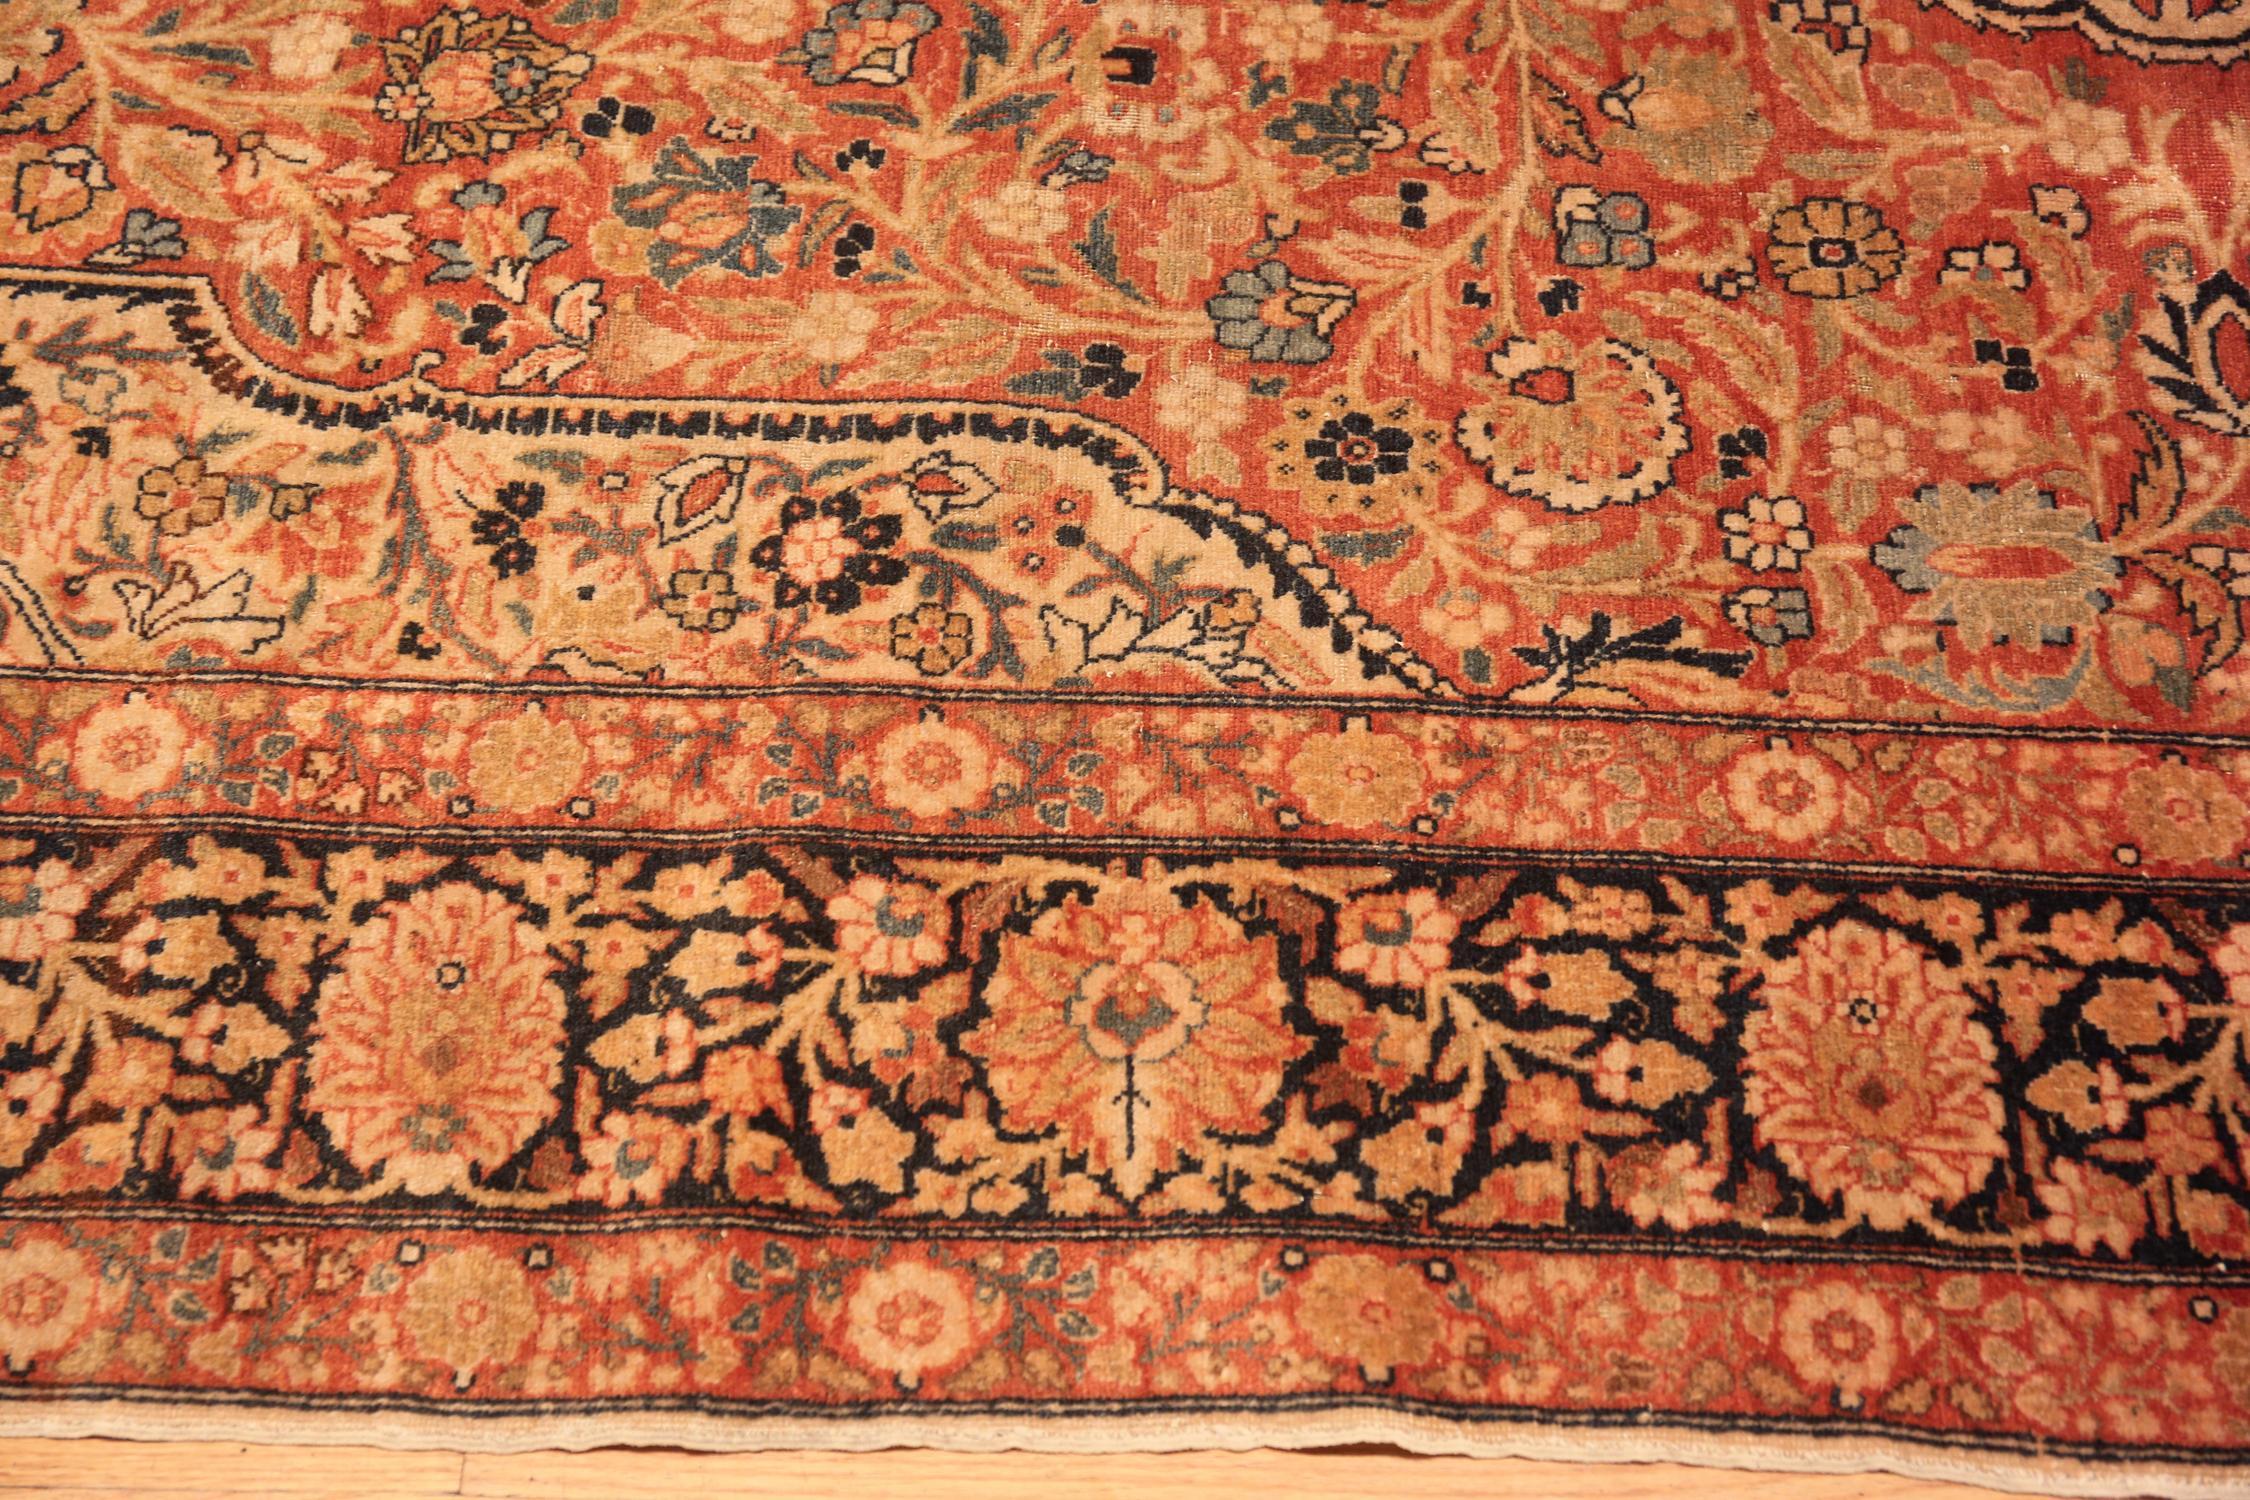 An Extremely Impressive Antique Persian Tabriz Floral Area Rug, country of origin: Persian Rugs, Circa date: 1920